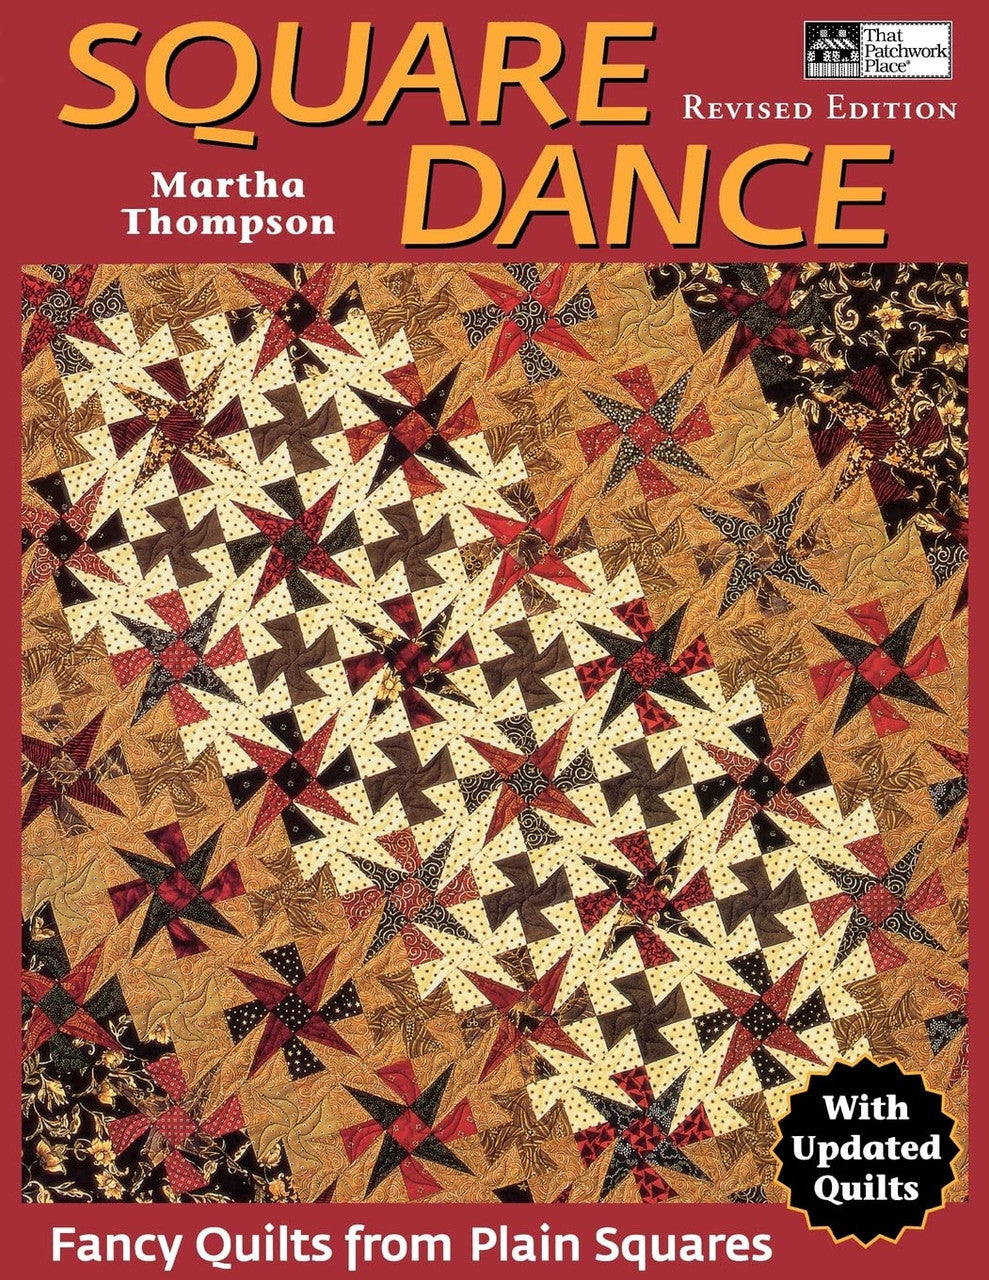 Square Dance - Revised Edition Book by Martha Thompson